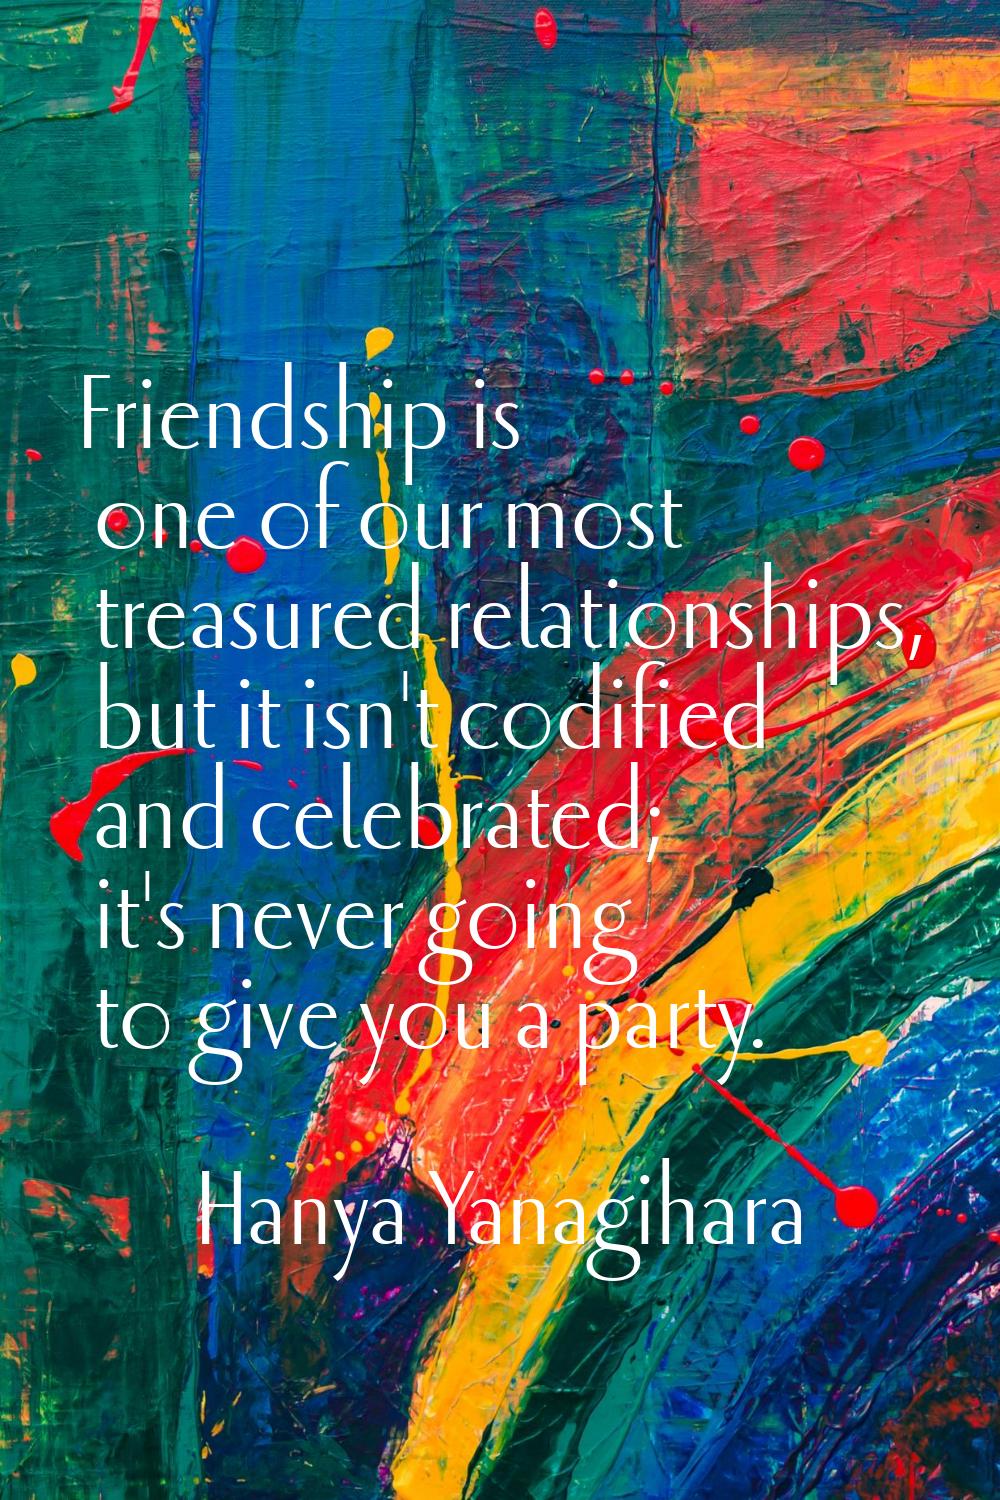 Friendship is one of our most treasured relationships, but it isn't codified and celebrated; it's n